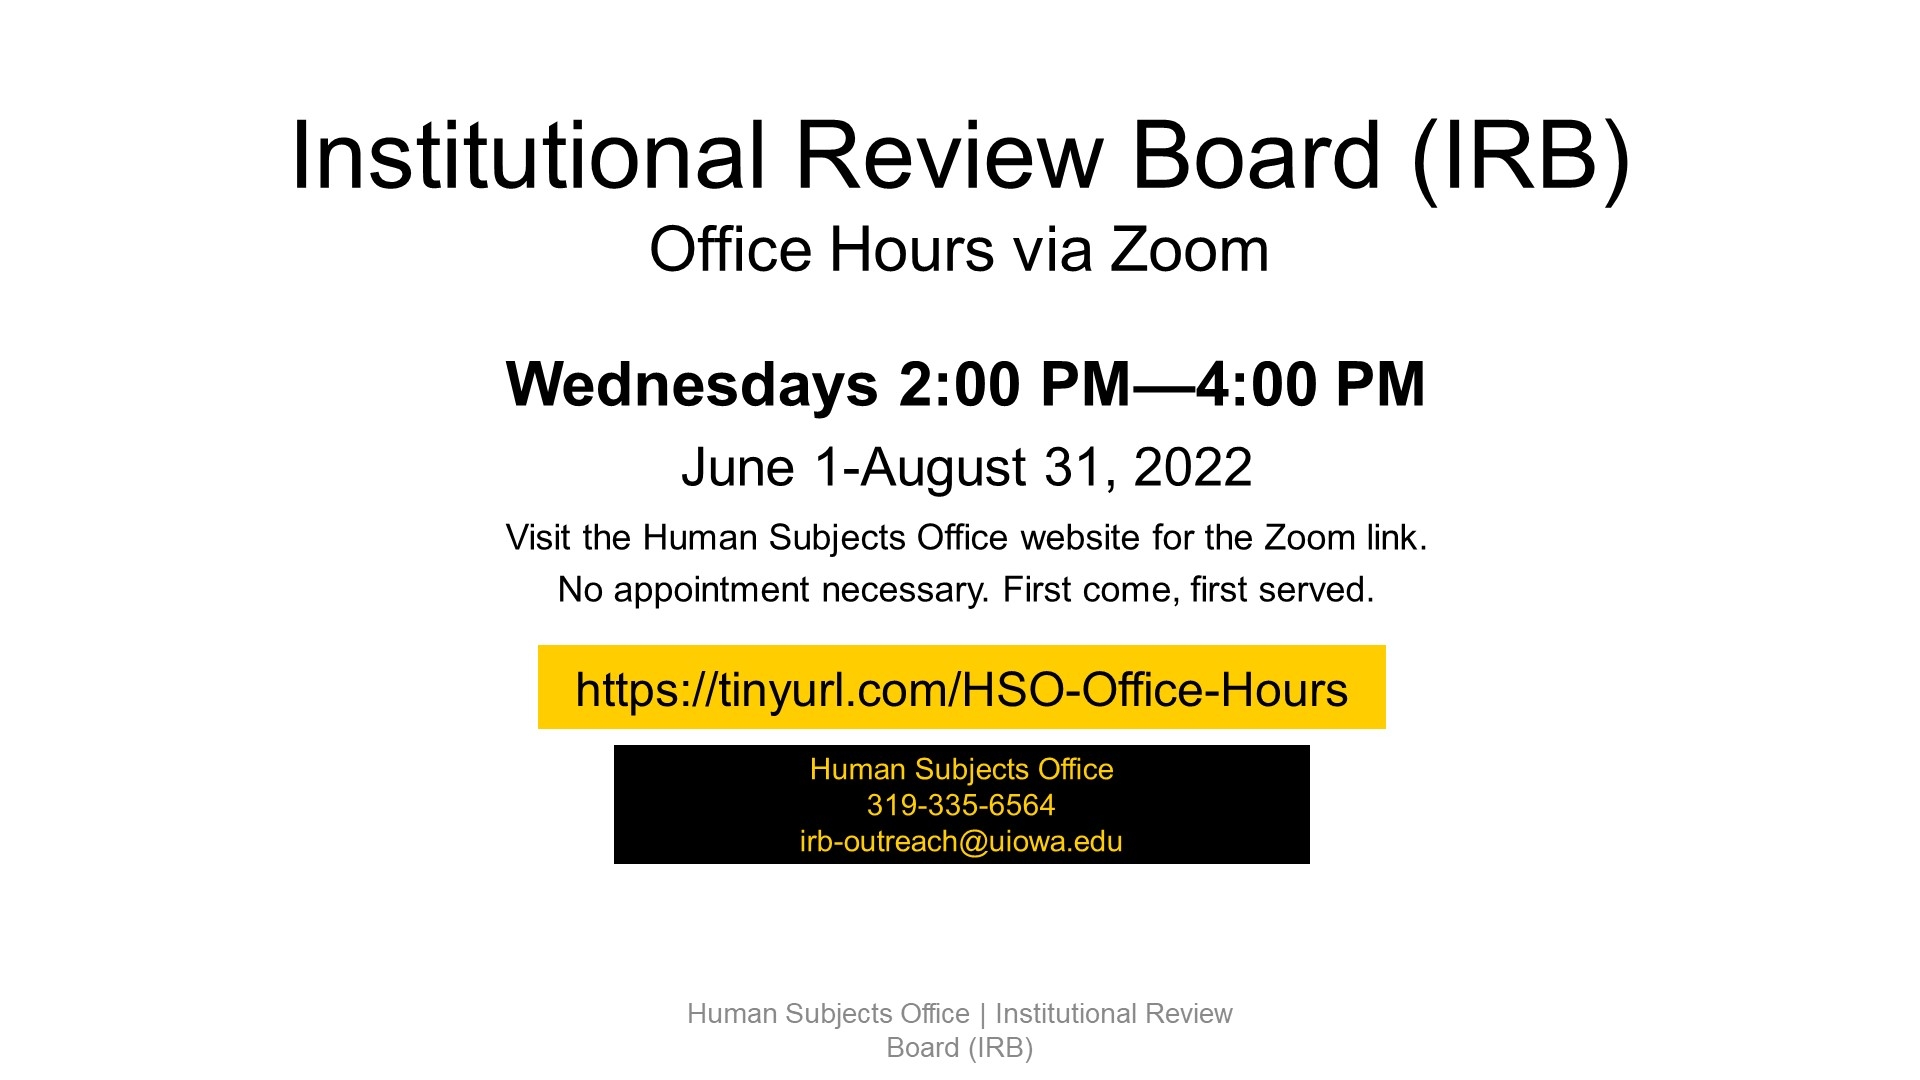 IRB Office Hours via Zoom. Wednesdays 2-4p, June 1- August, 31, 2022. https://tinyurl.com/HSO-Office-Hours